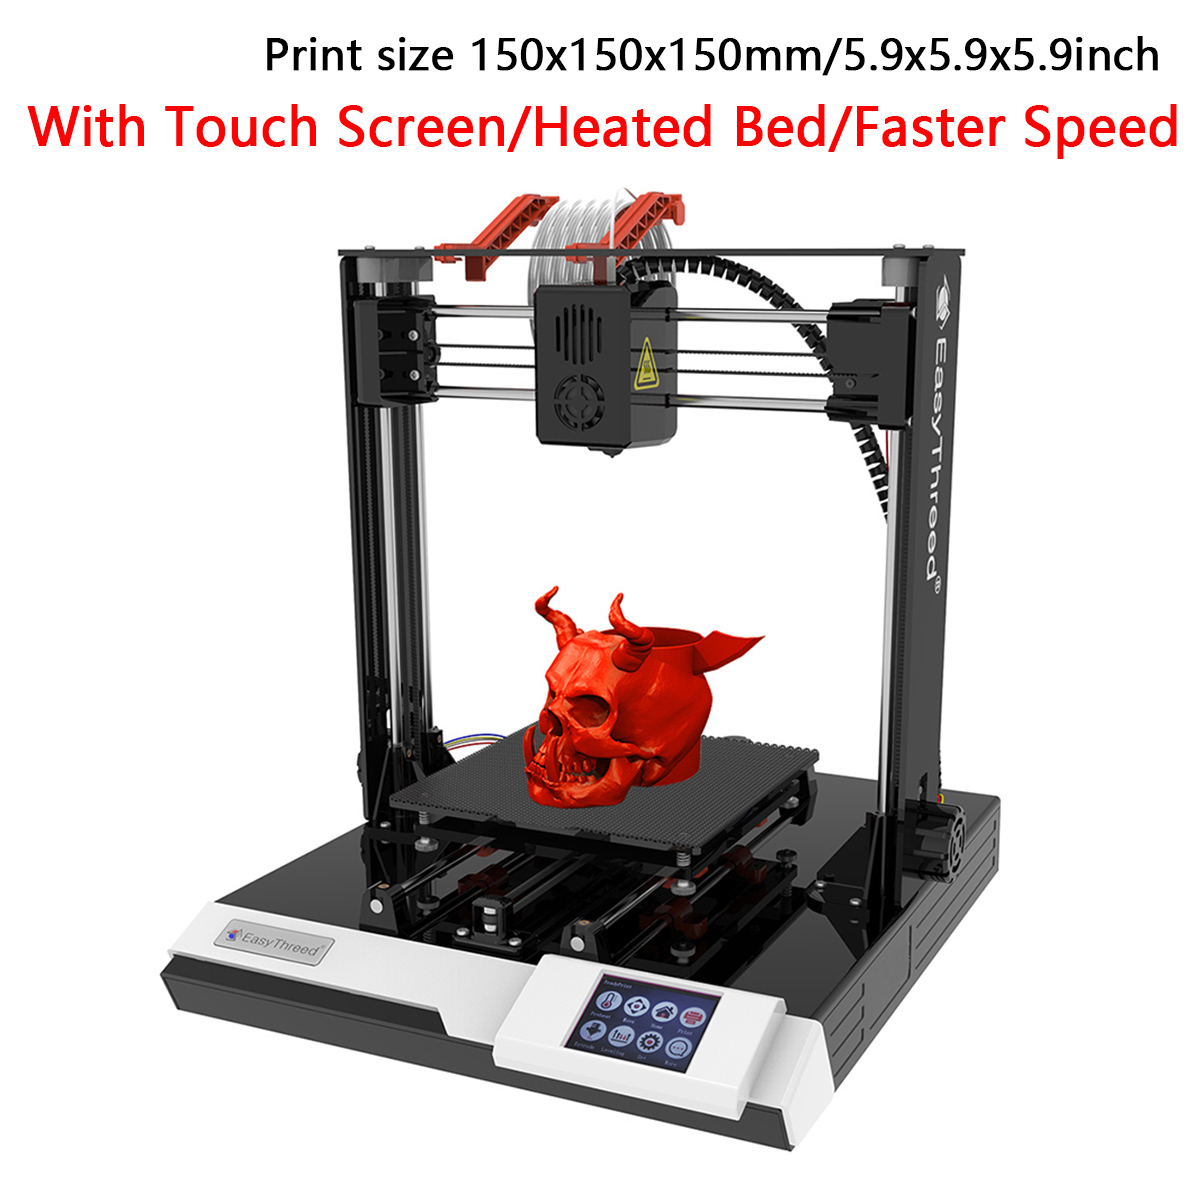 Easythreed K8plus  3D Printer for Household Education & Students 150*150*150mm Printing Size with hotbed with 1.75mm 0.4mm Nozzle Touch Screen control/CE Certificate